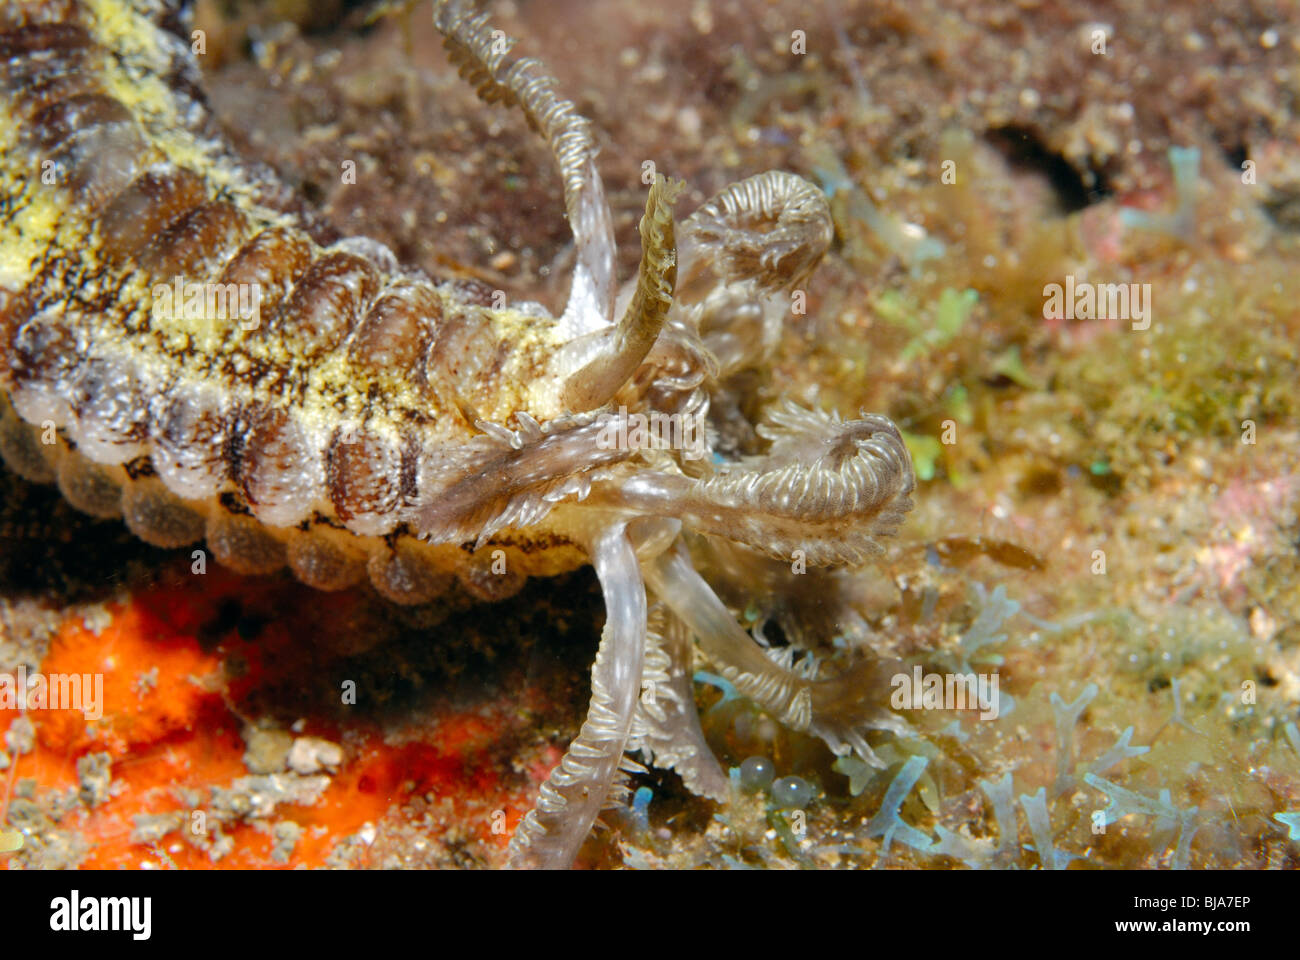 Tiger tail sea cucumber in the Gulf of Mexico. Stock Photo